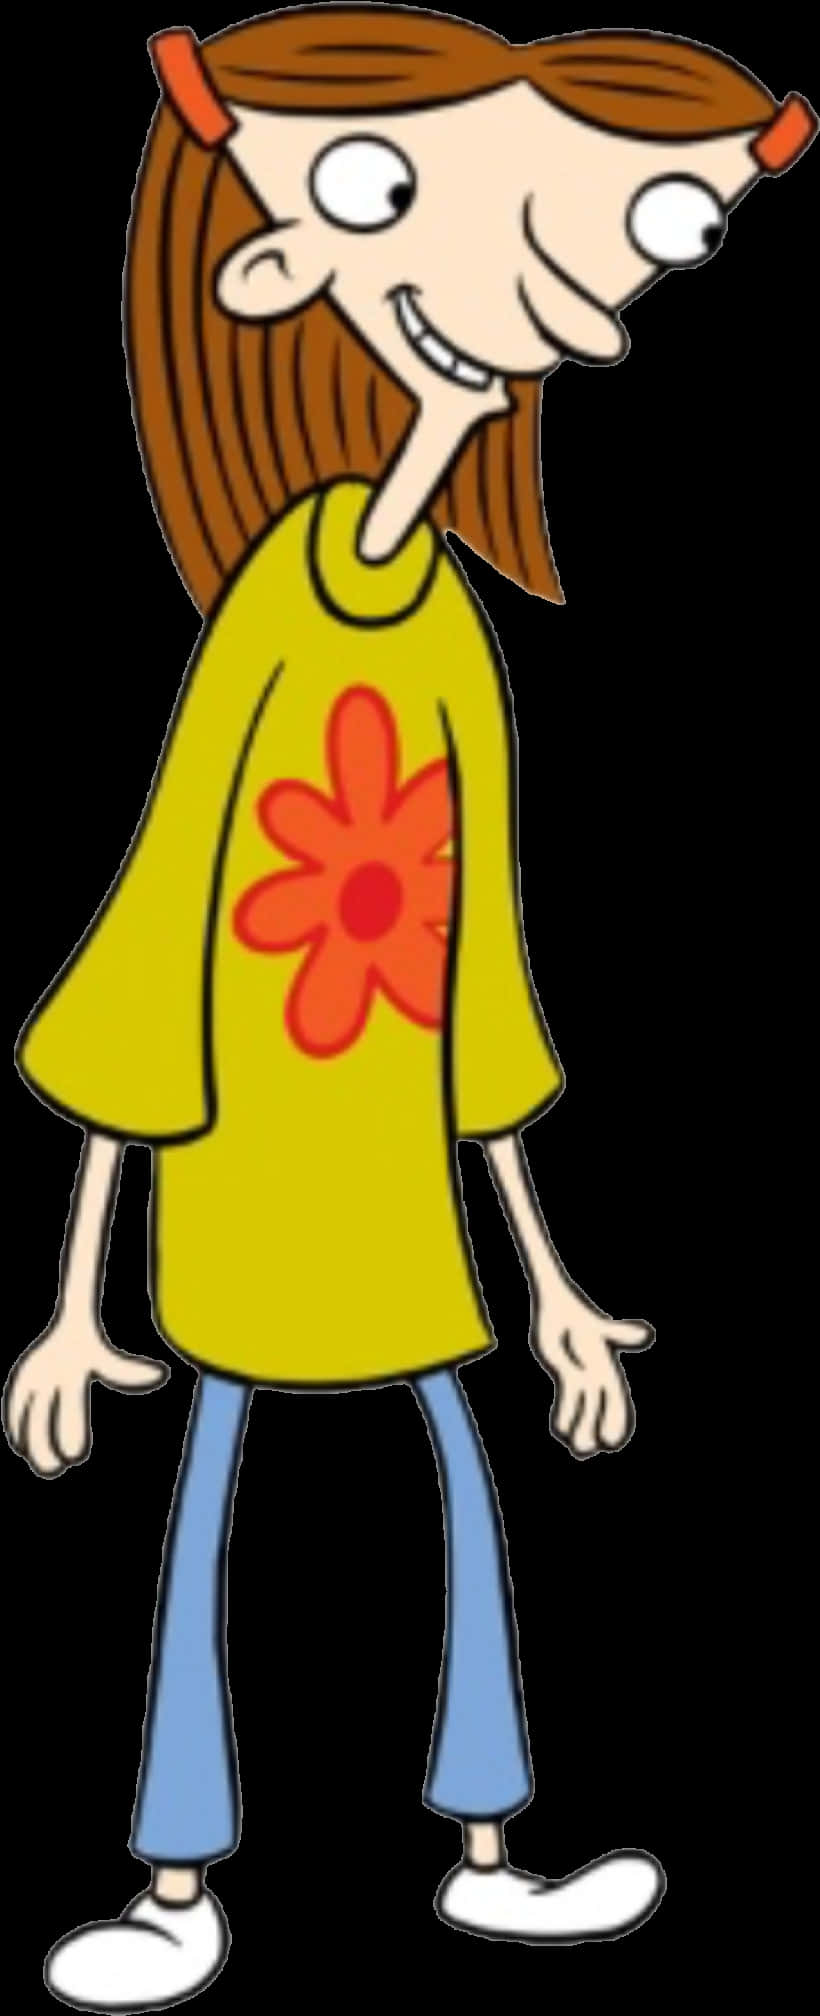 A Cartoon Character With A Flower On It